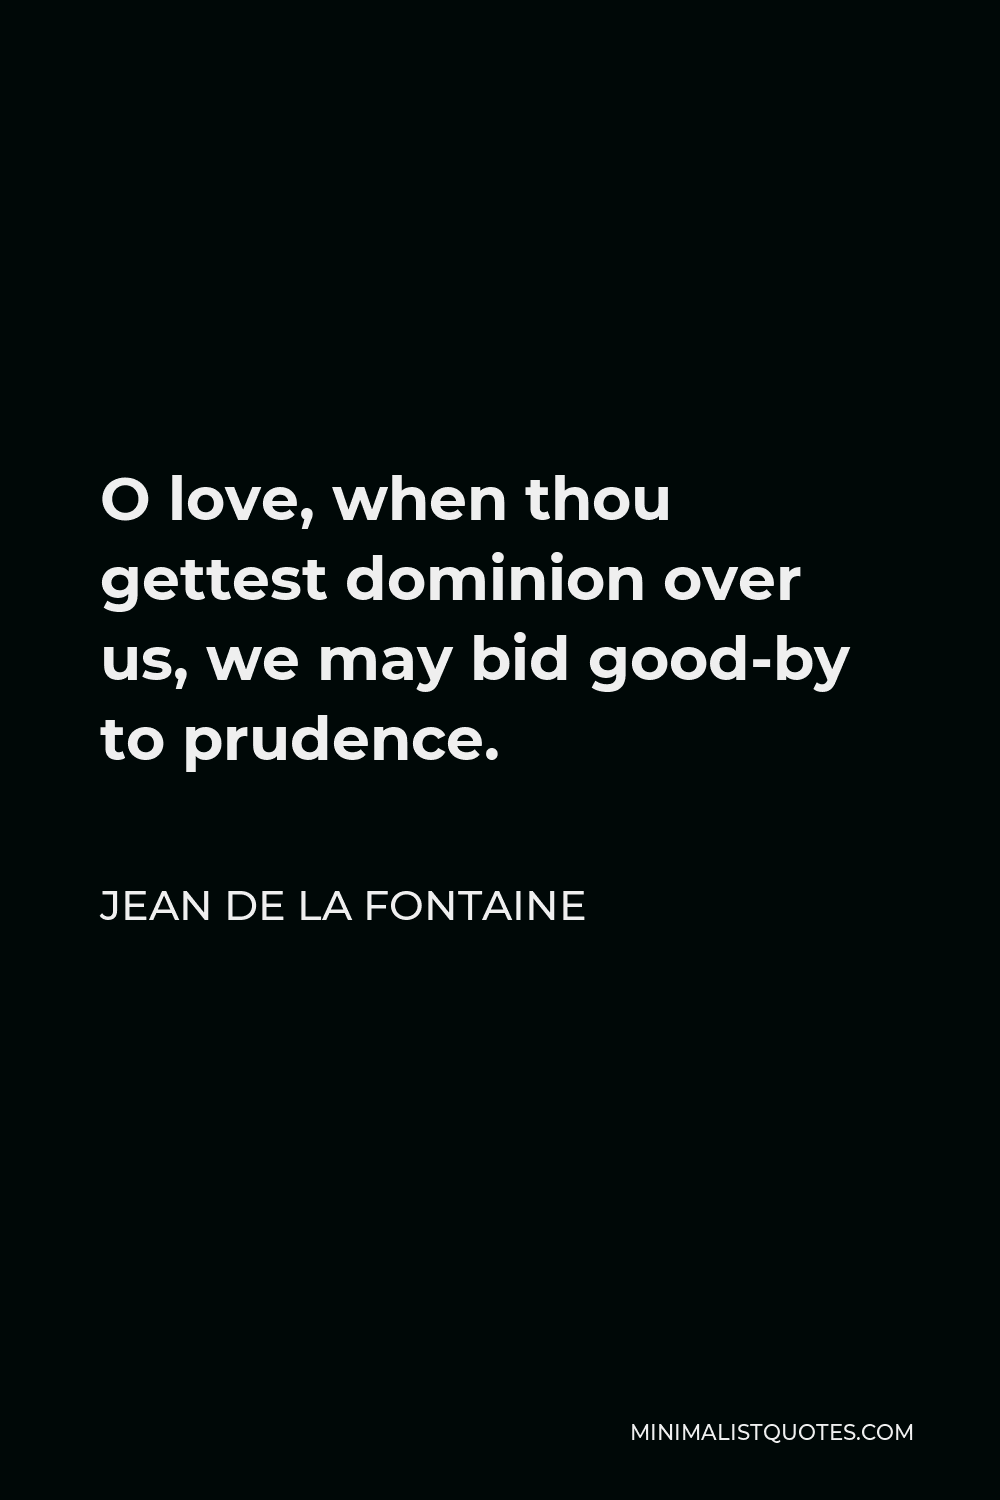 Jean de La Fontaine Quote - O love, when thou gettest dominion over us, we may bid good-by to prudence.